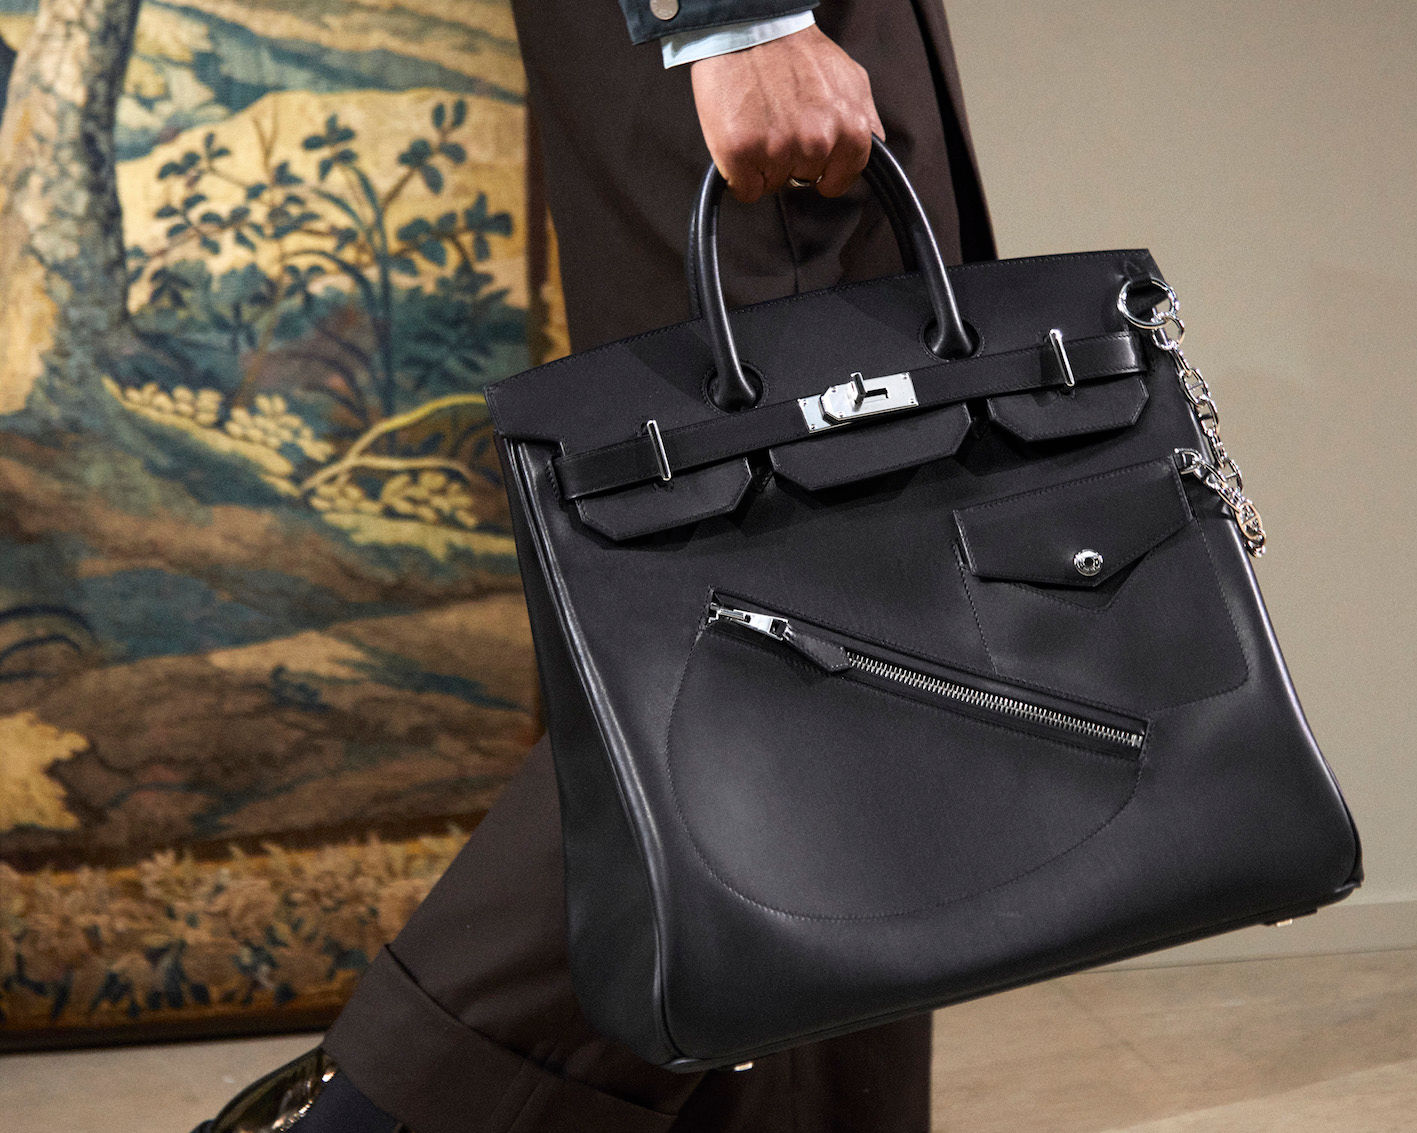 HERMES HAC 40 is becoming a must-have for men today in 2023